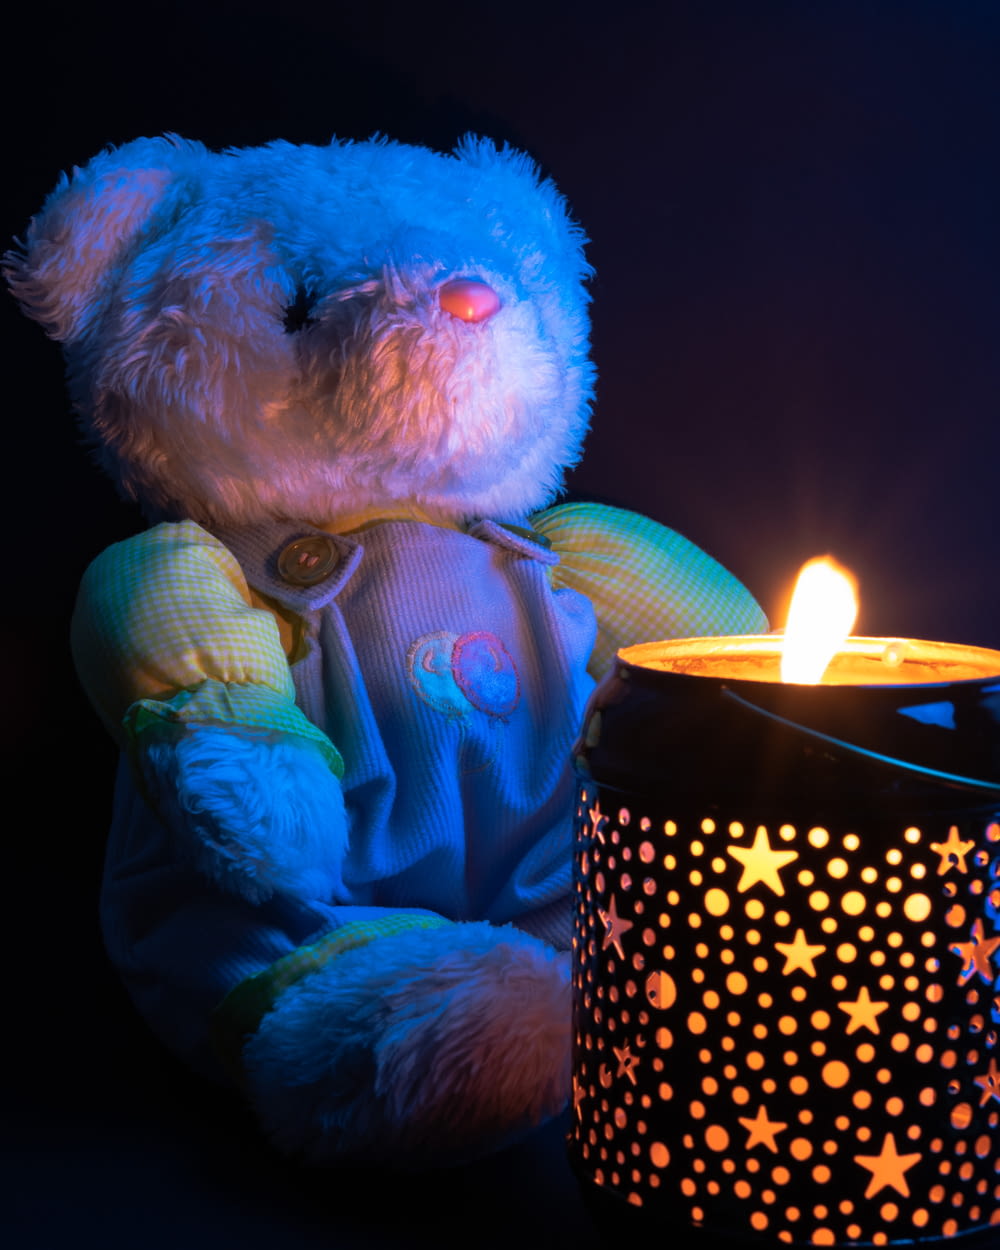 white bear plush toy holding lighted candle